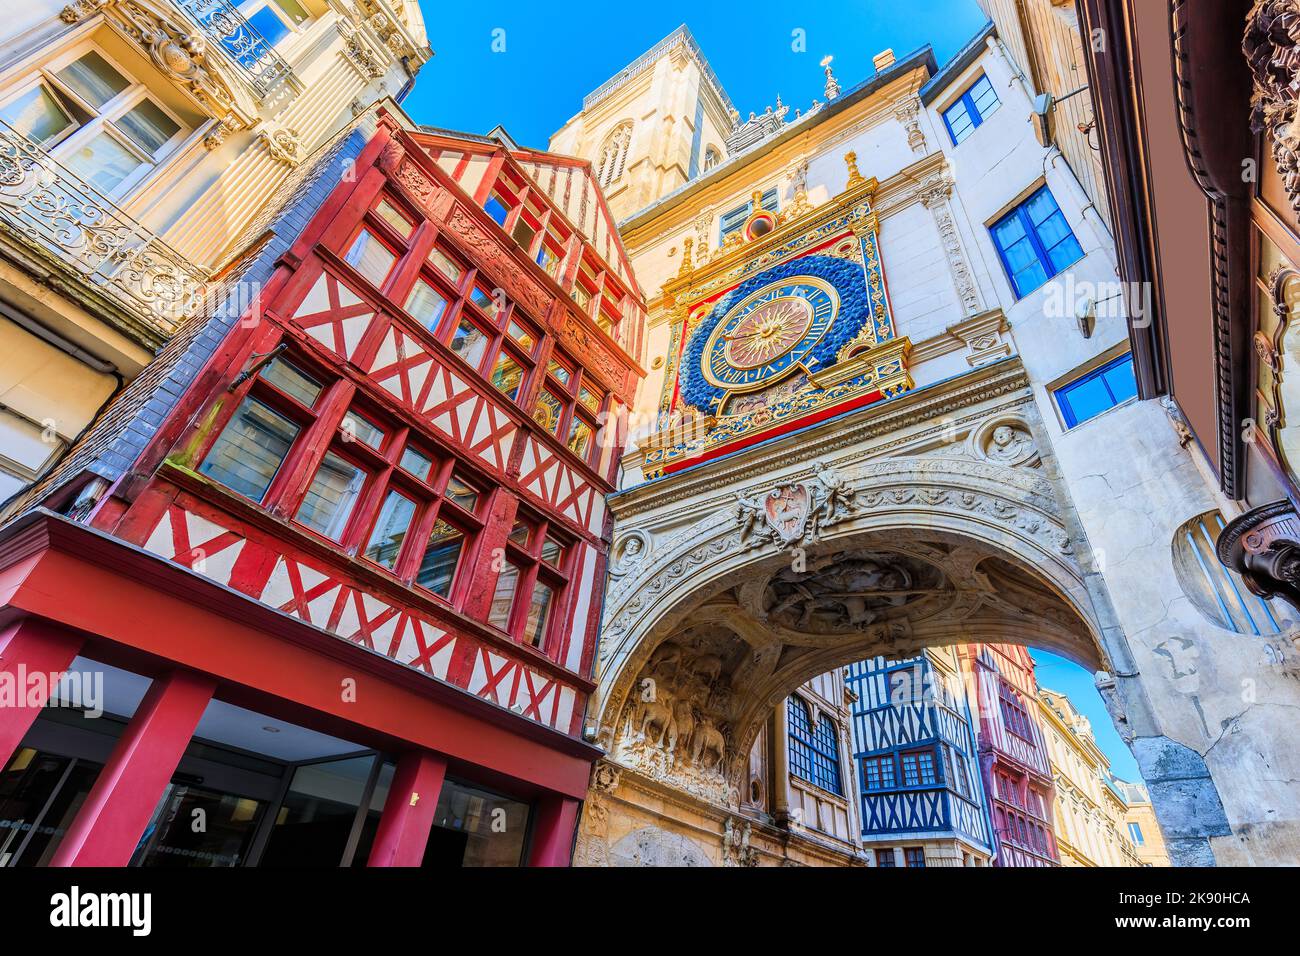 Rouen, Normandy, France. The Great-Clock (Gros-Horloge) a fourteenth-century astronomical clock. Stock Photo